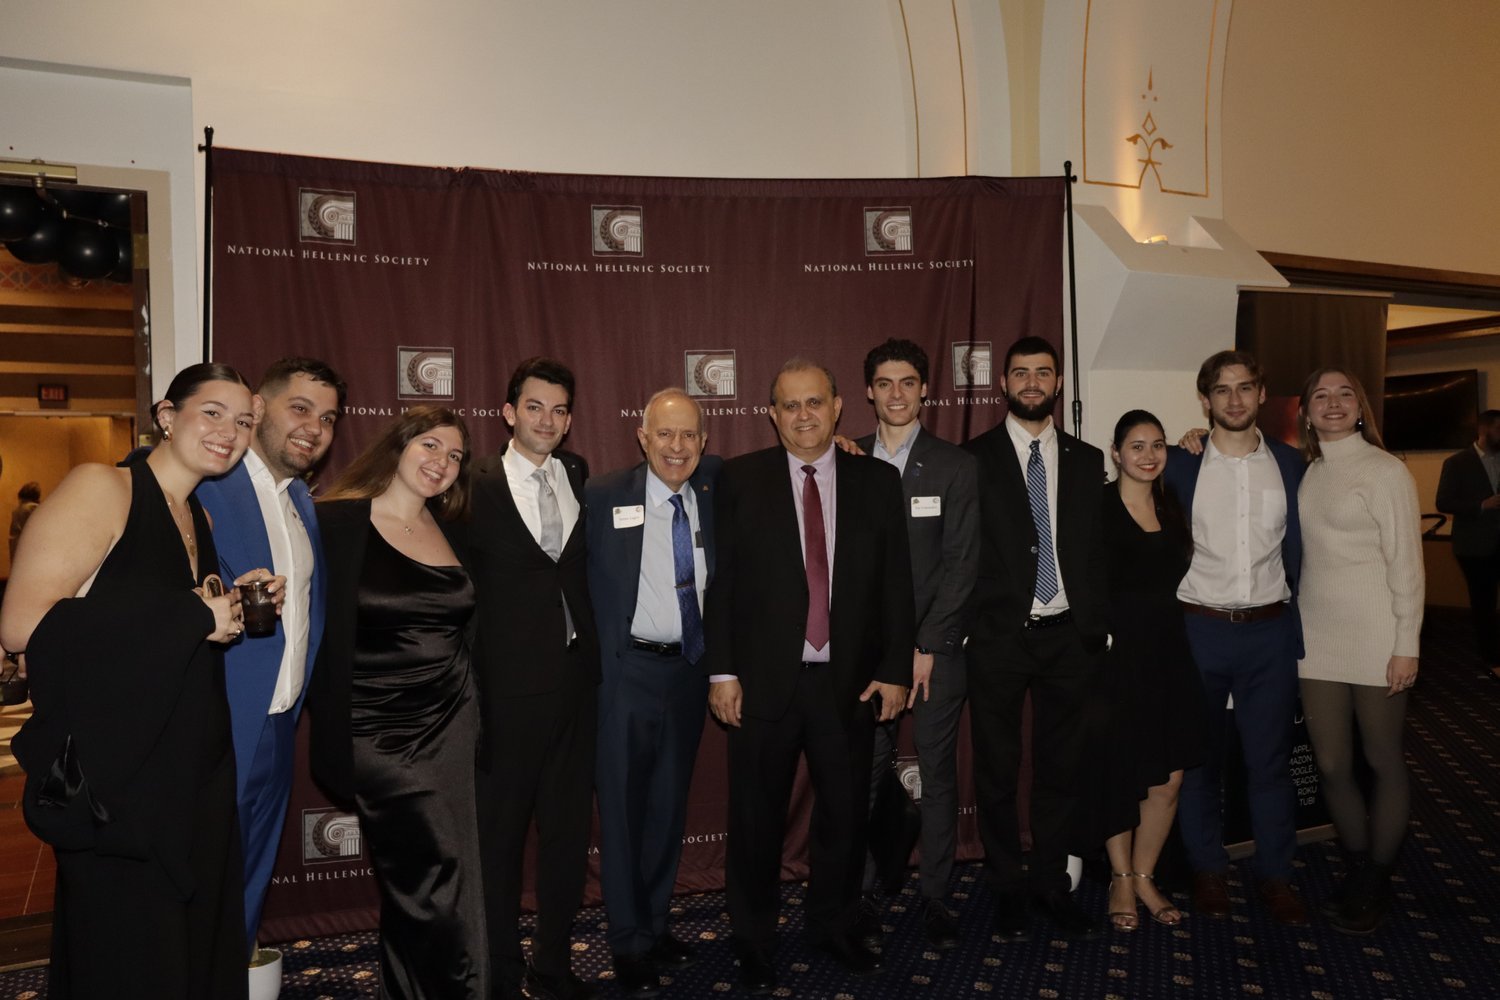  AHI President Nick Larigakis,  Chairman James Lagos, Executive Director Zac Cotronakis, Legislative Director Alexander Christofor, and the team of volunteers who helped make the events possible. 